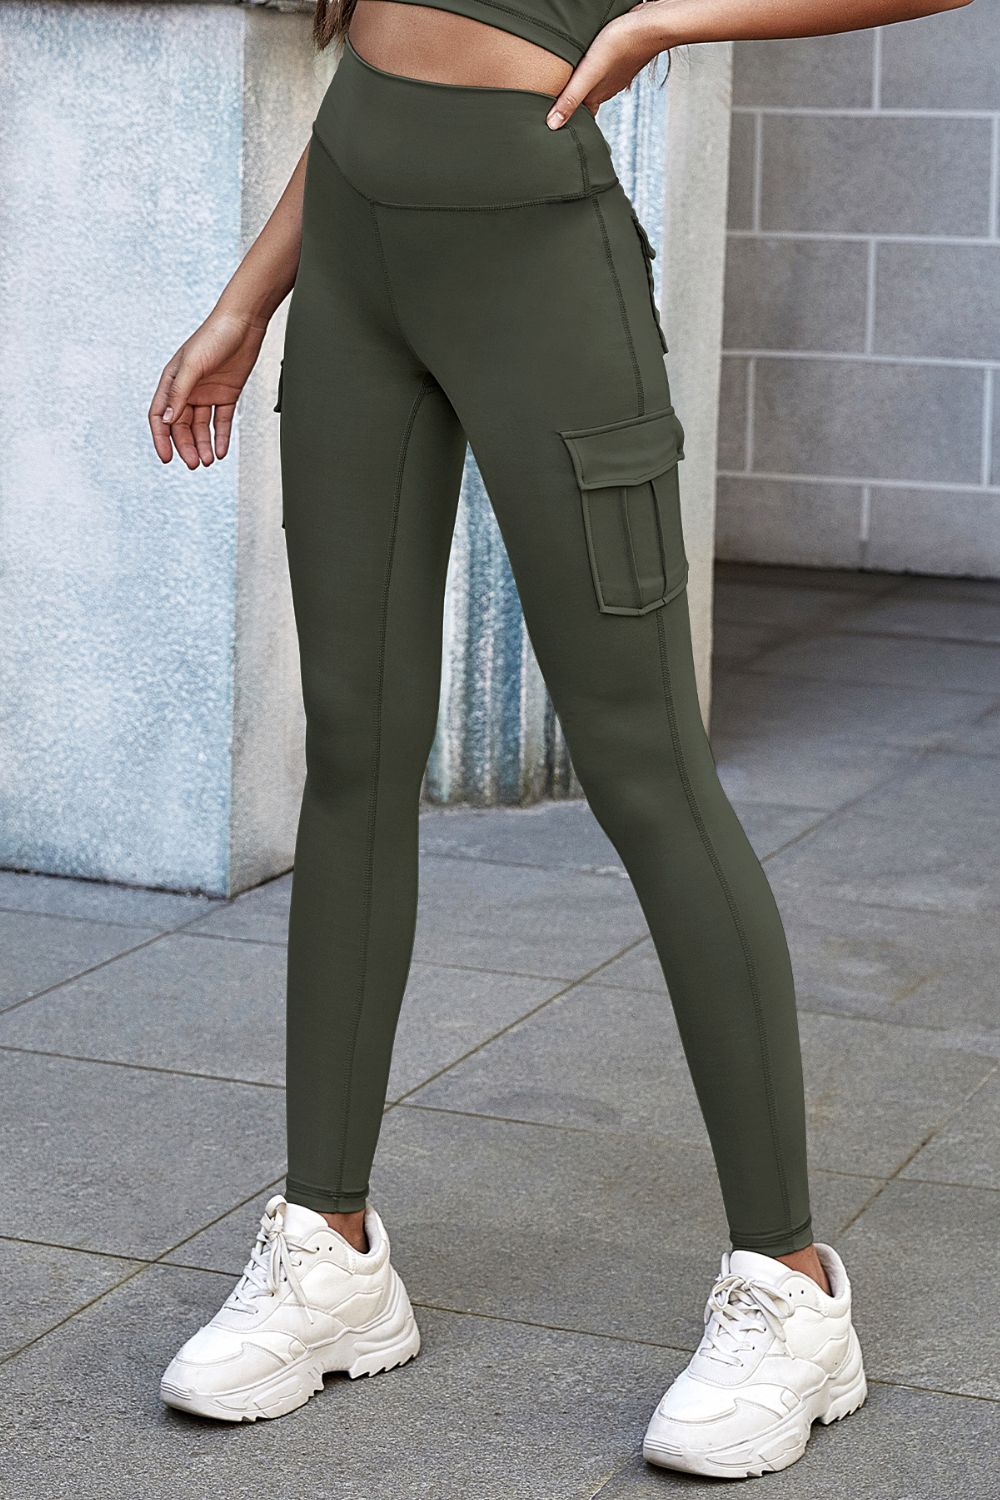 High Waist Leggings with Pockets - A Better You